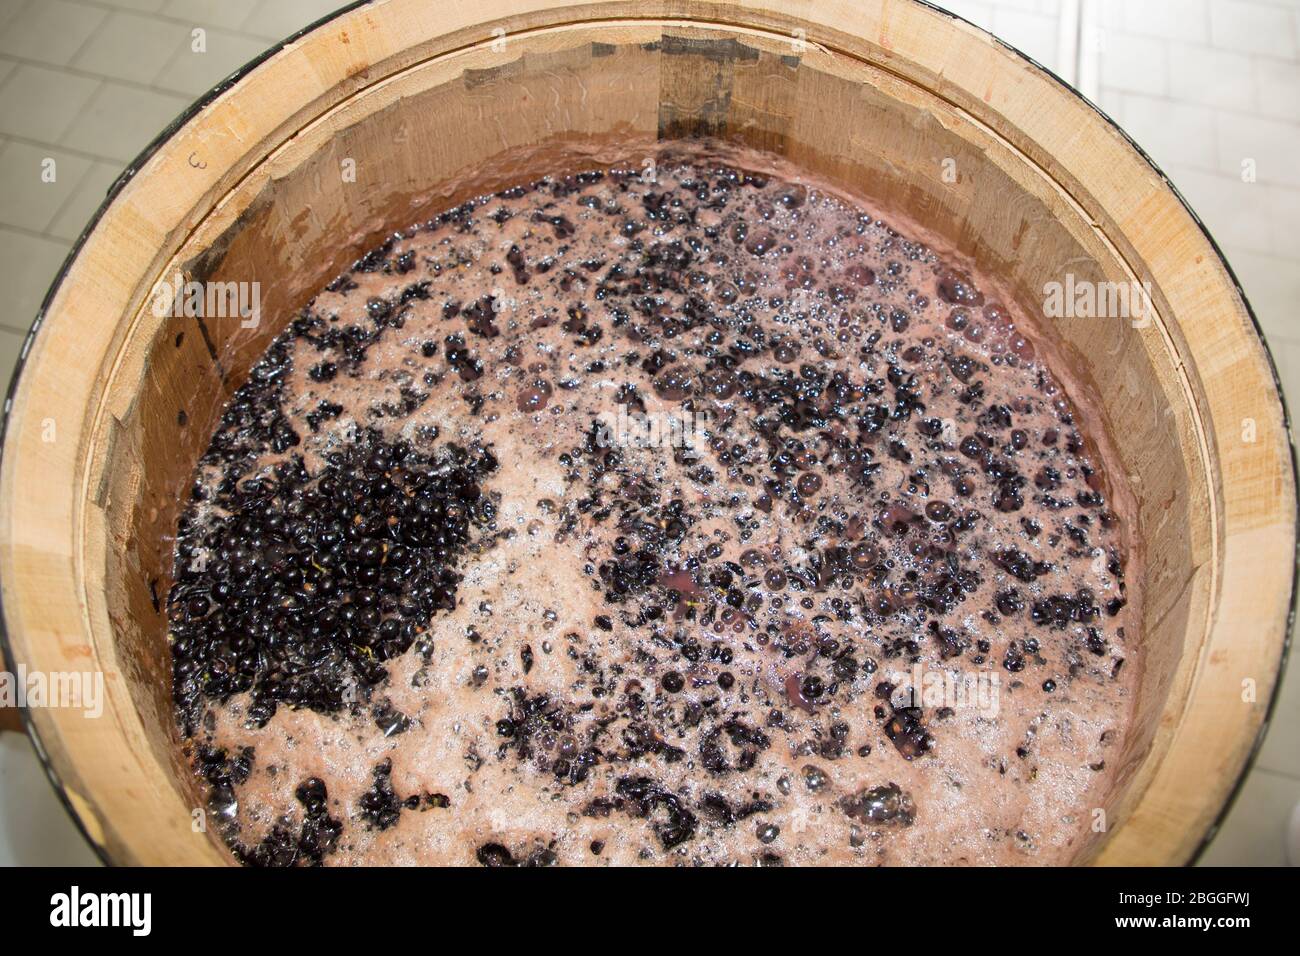 Traditional organic wine making grapes in wooden wine barrel Stock Photo